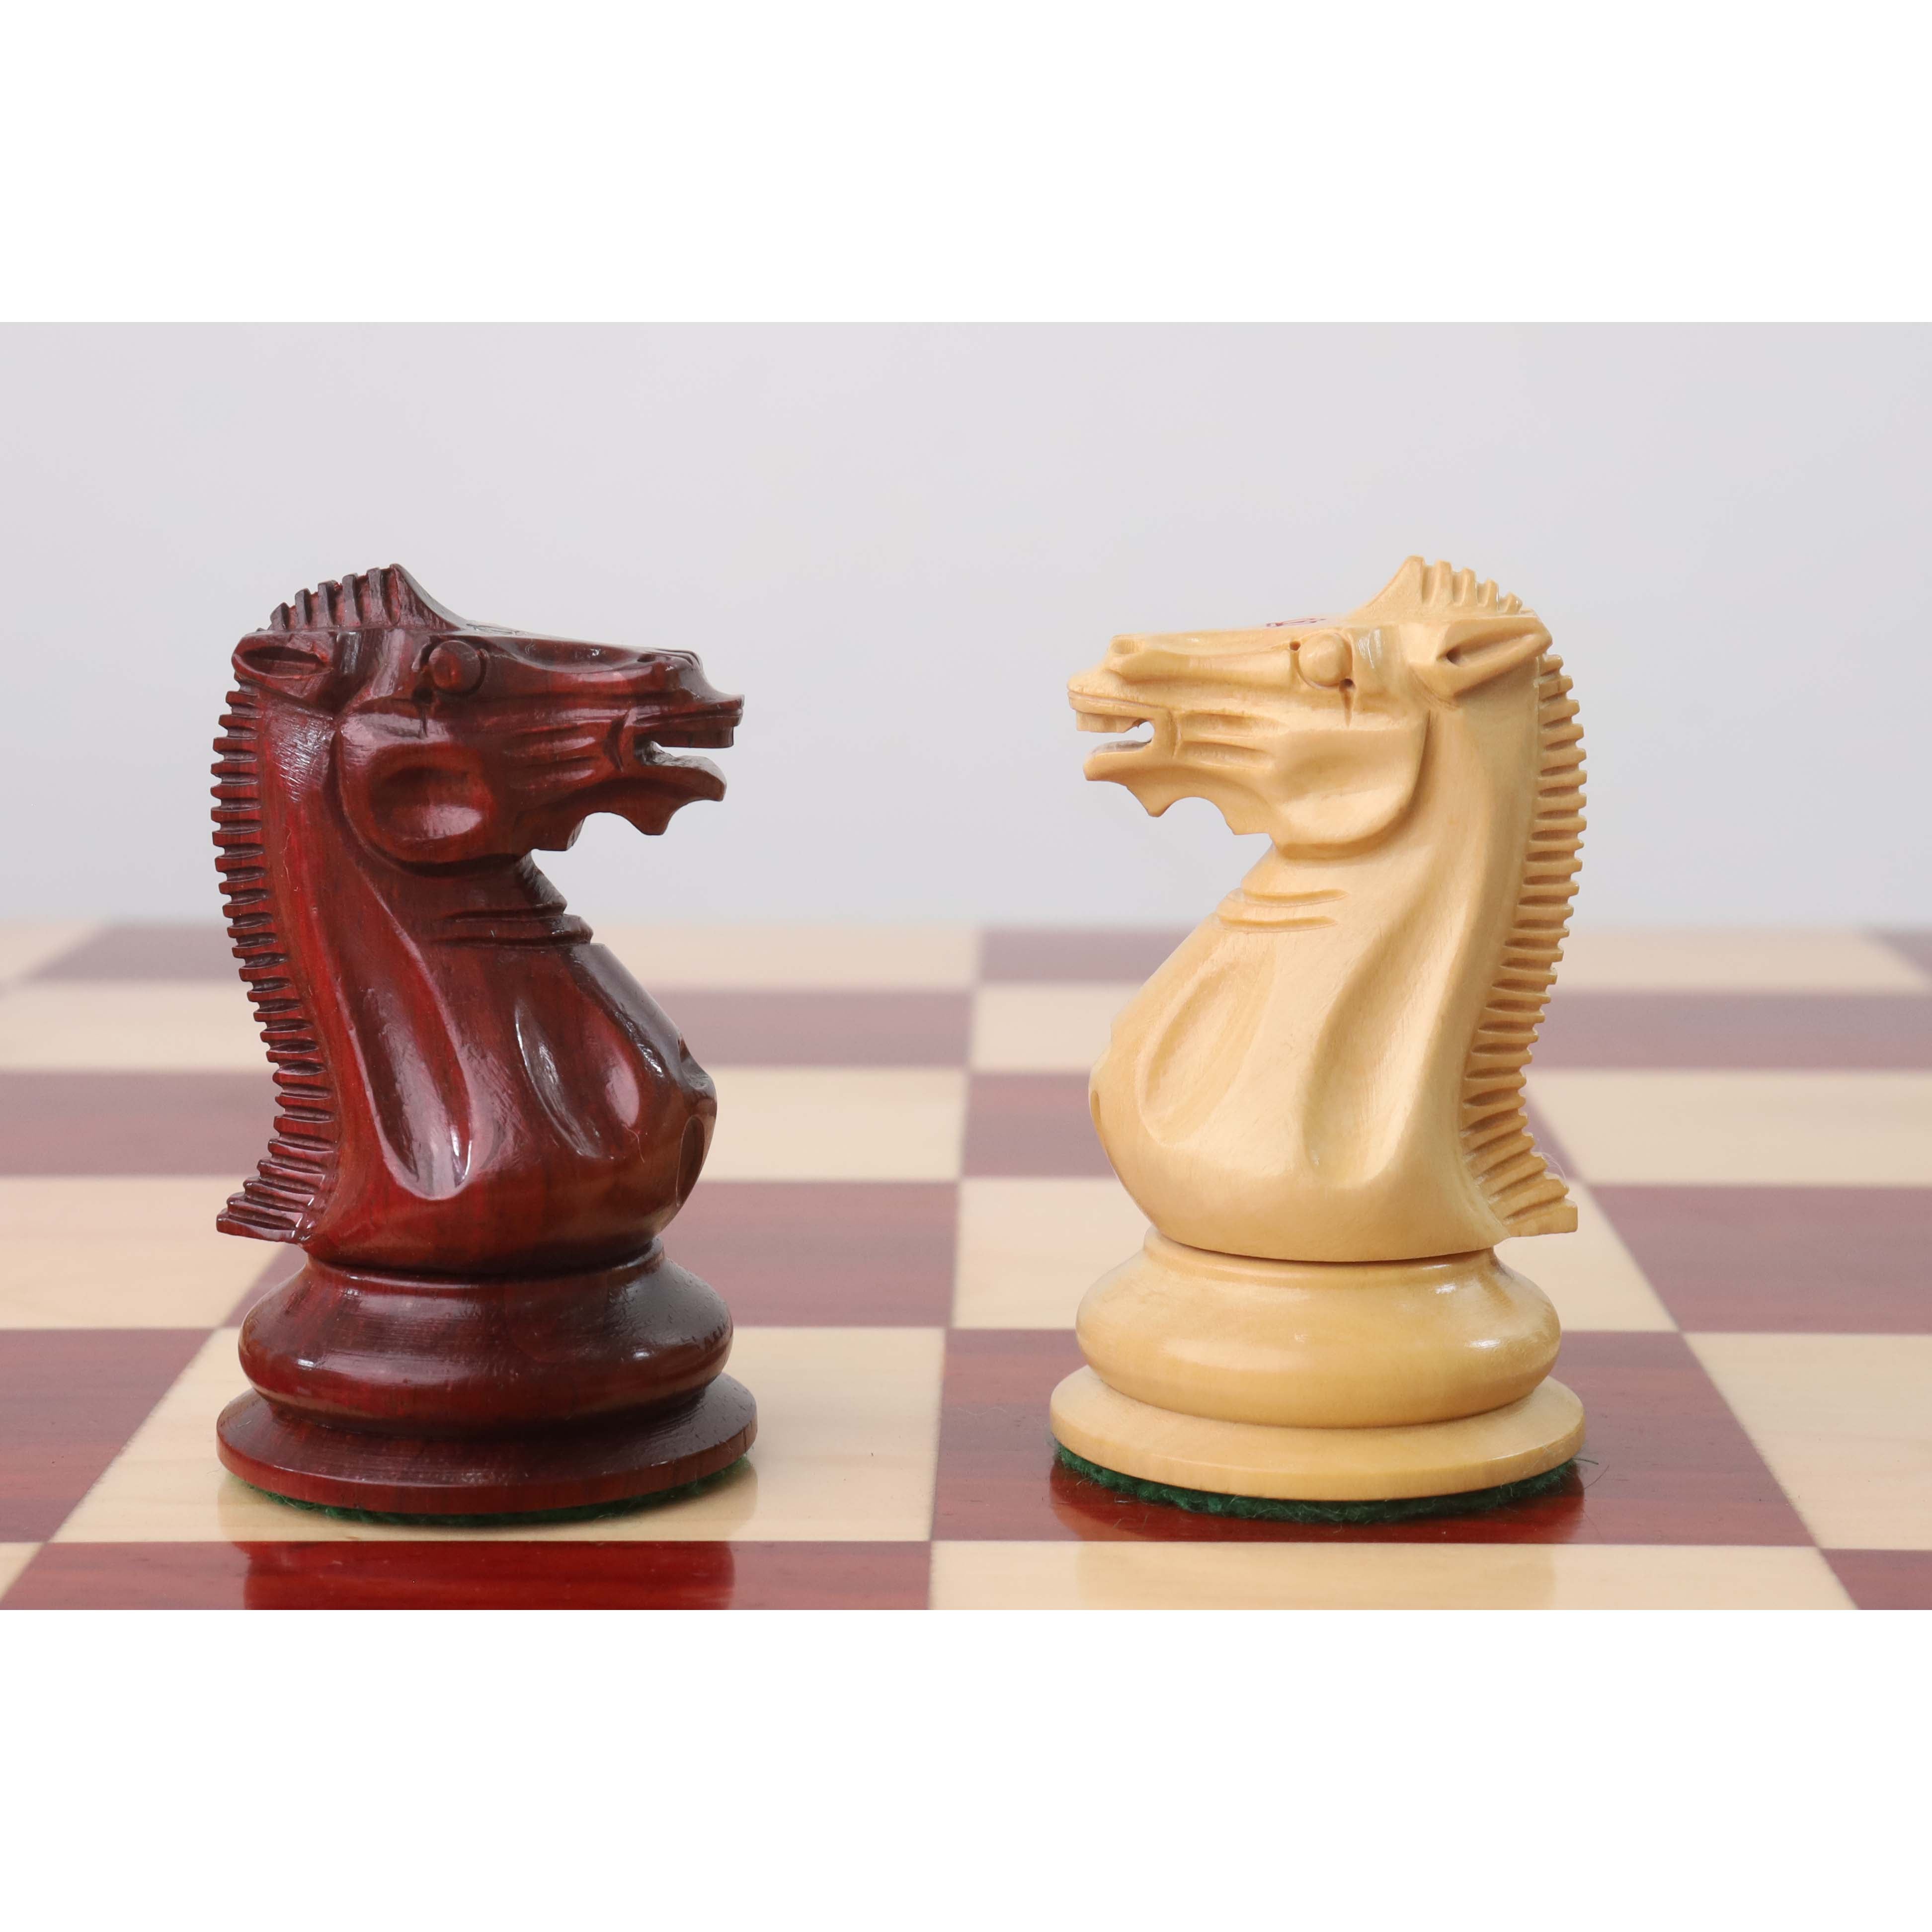 Combo of 1849 Jacques Cook Staunton Chess Pieces - Bud Rosewood with 21" Board and Storage Box